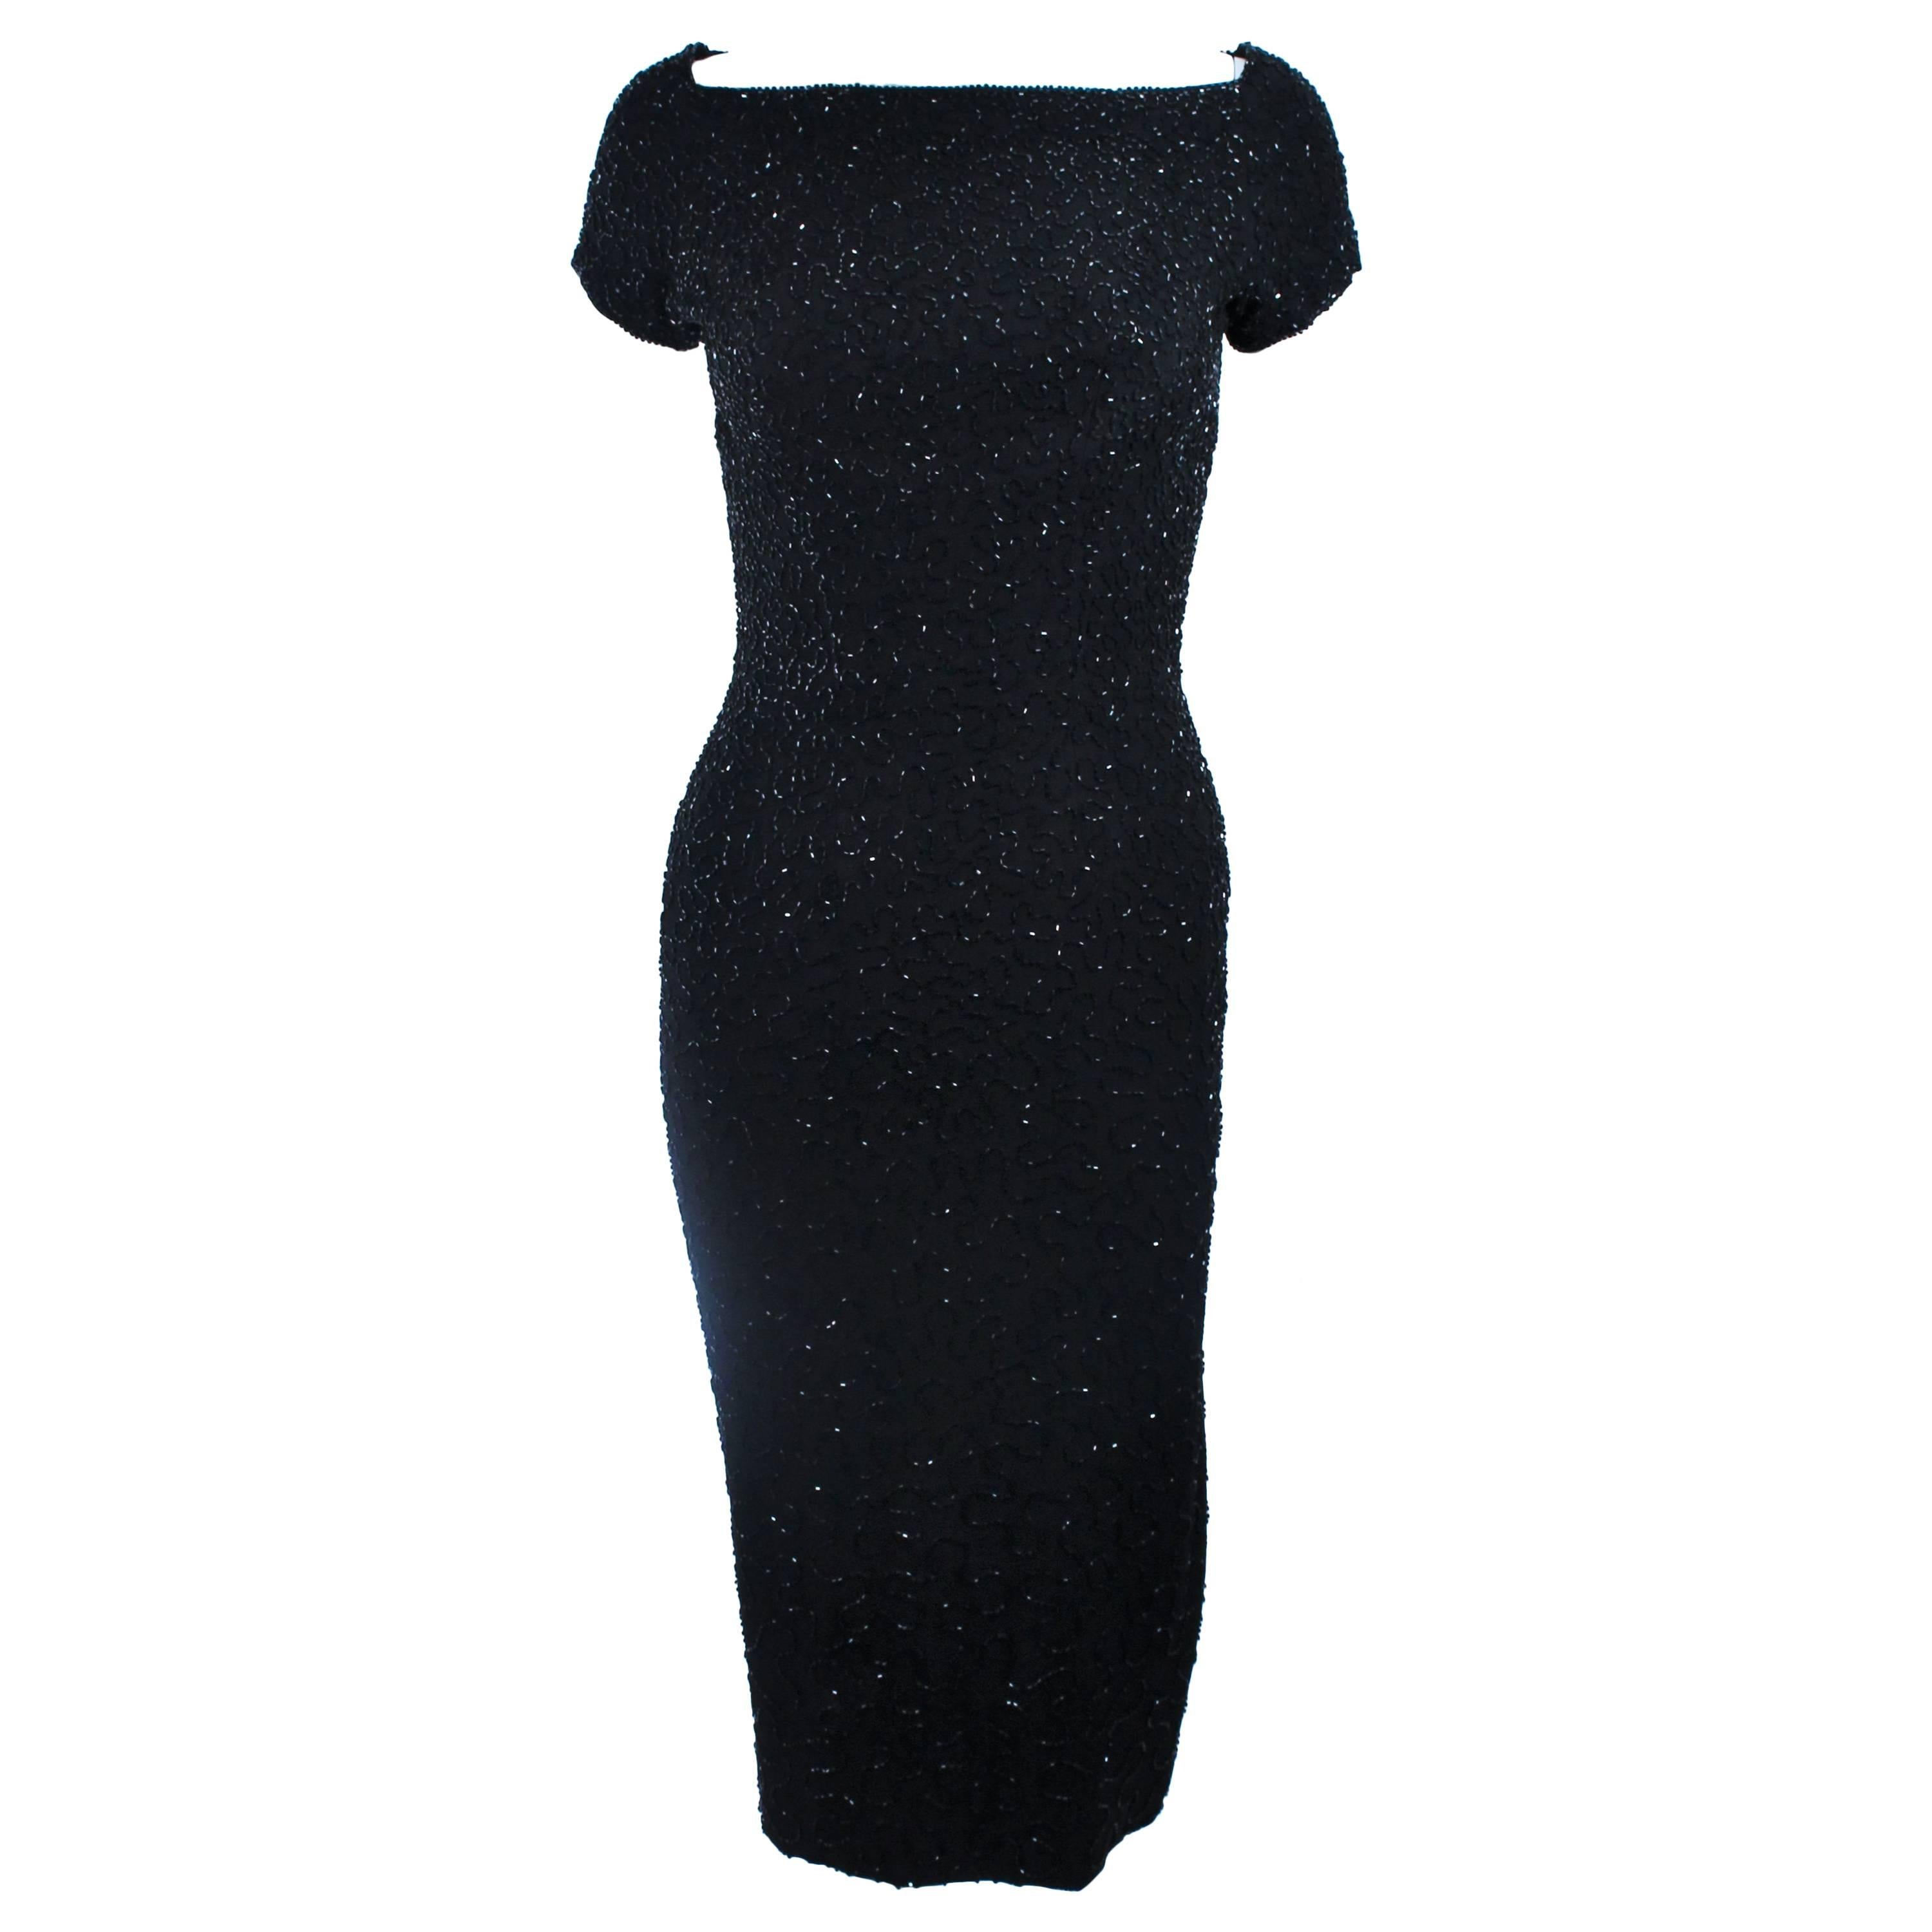 CEIL CHAPMAN Black Beaded Cocktail Dress with Square Neckline Size 2 For Sale